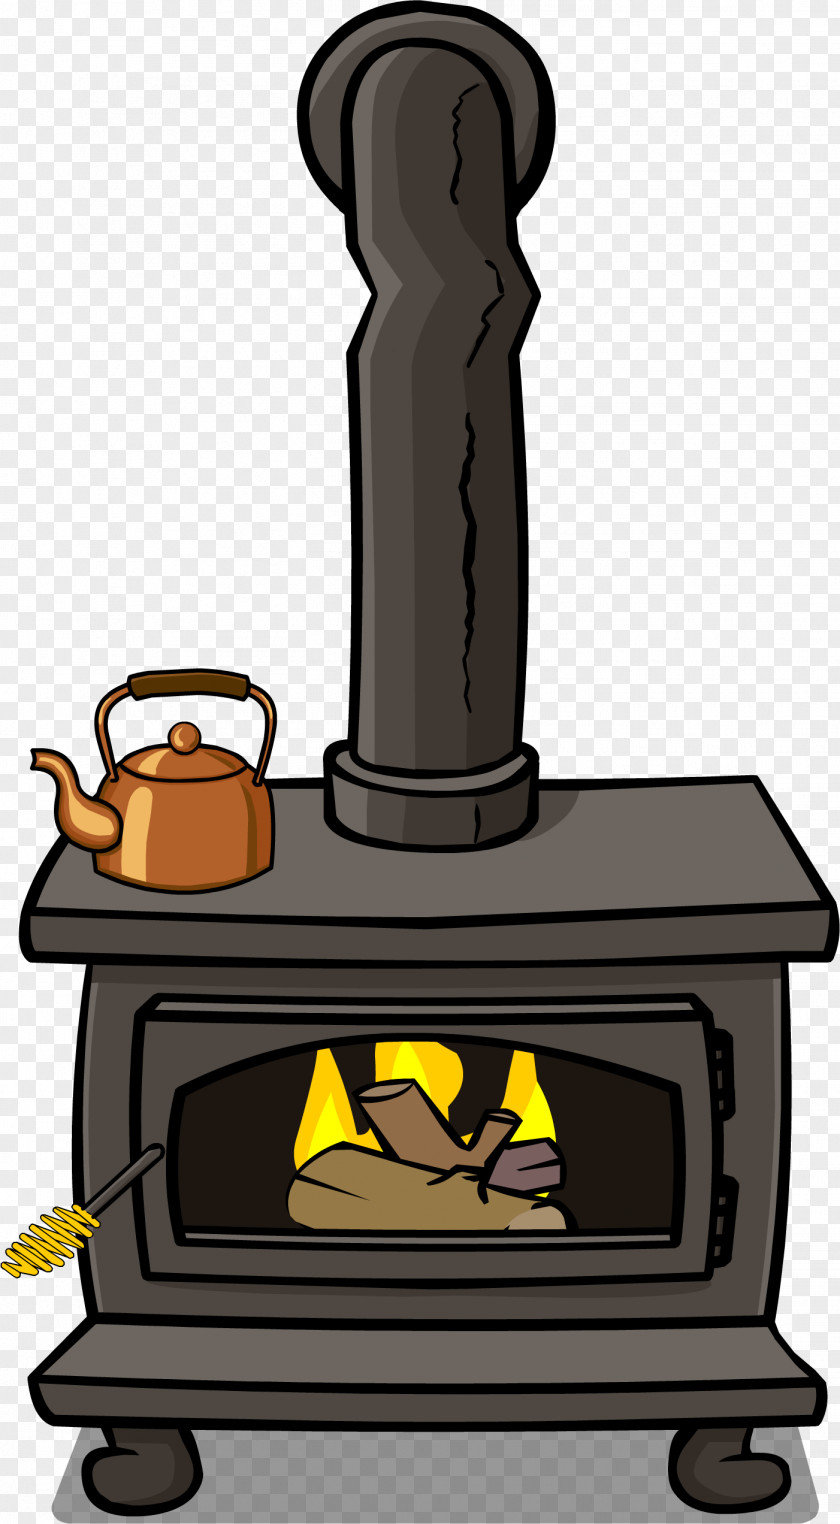 Stove Furnace Wood Stoves Clip Art Cooking Ranges PNG